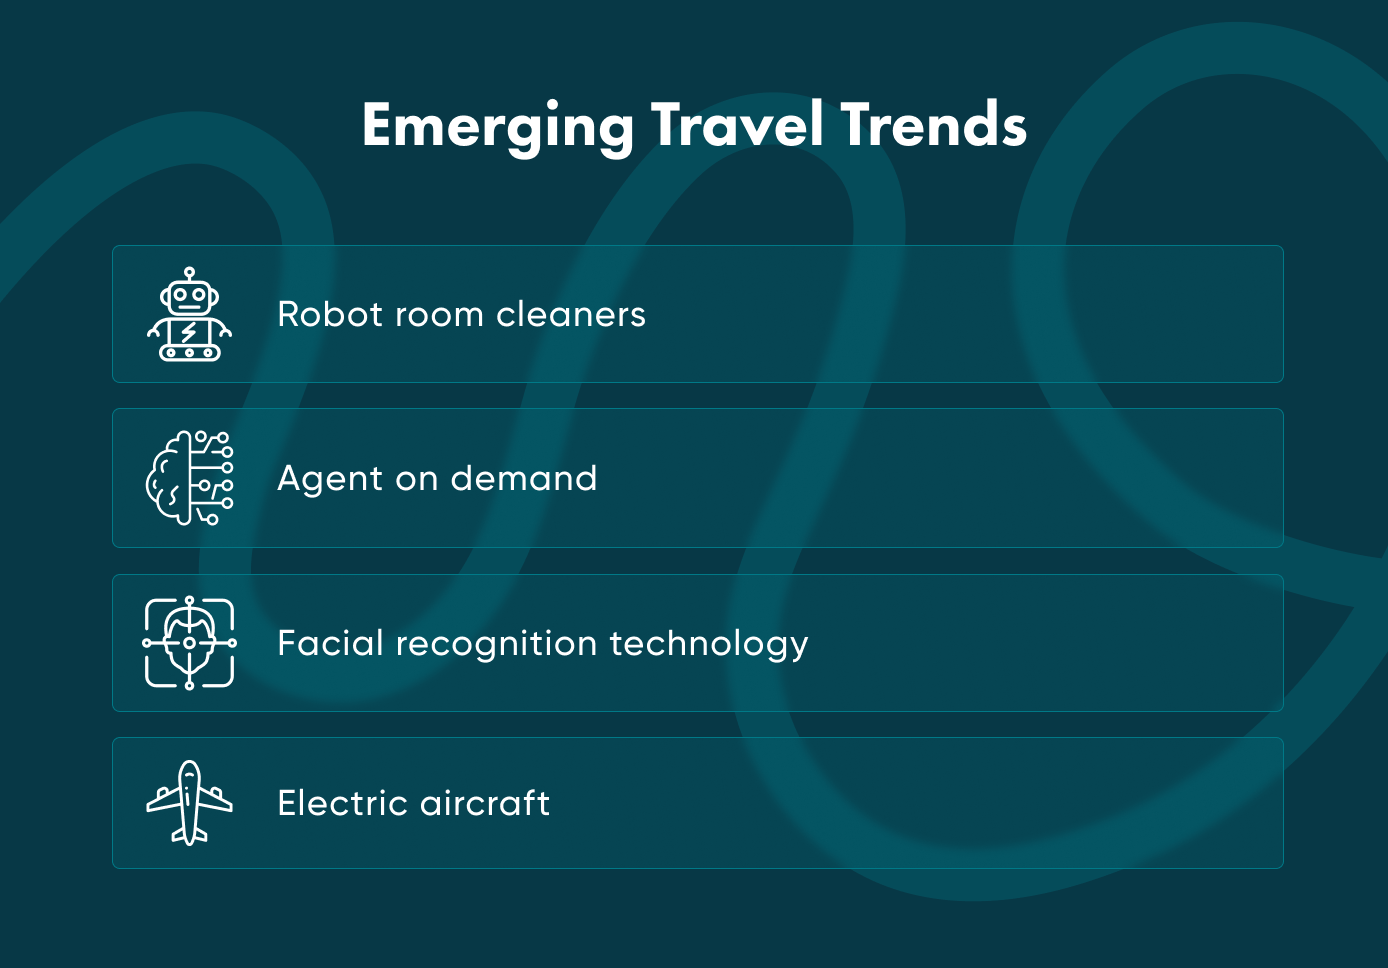 Here are some trending topics on the travel technology scene. Let’s see how they pan out in the near future.